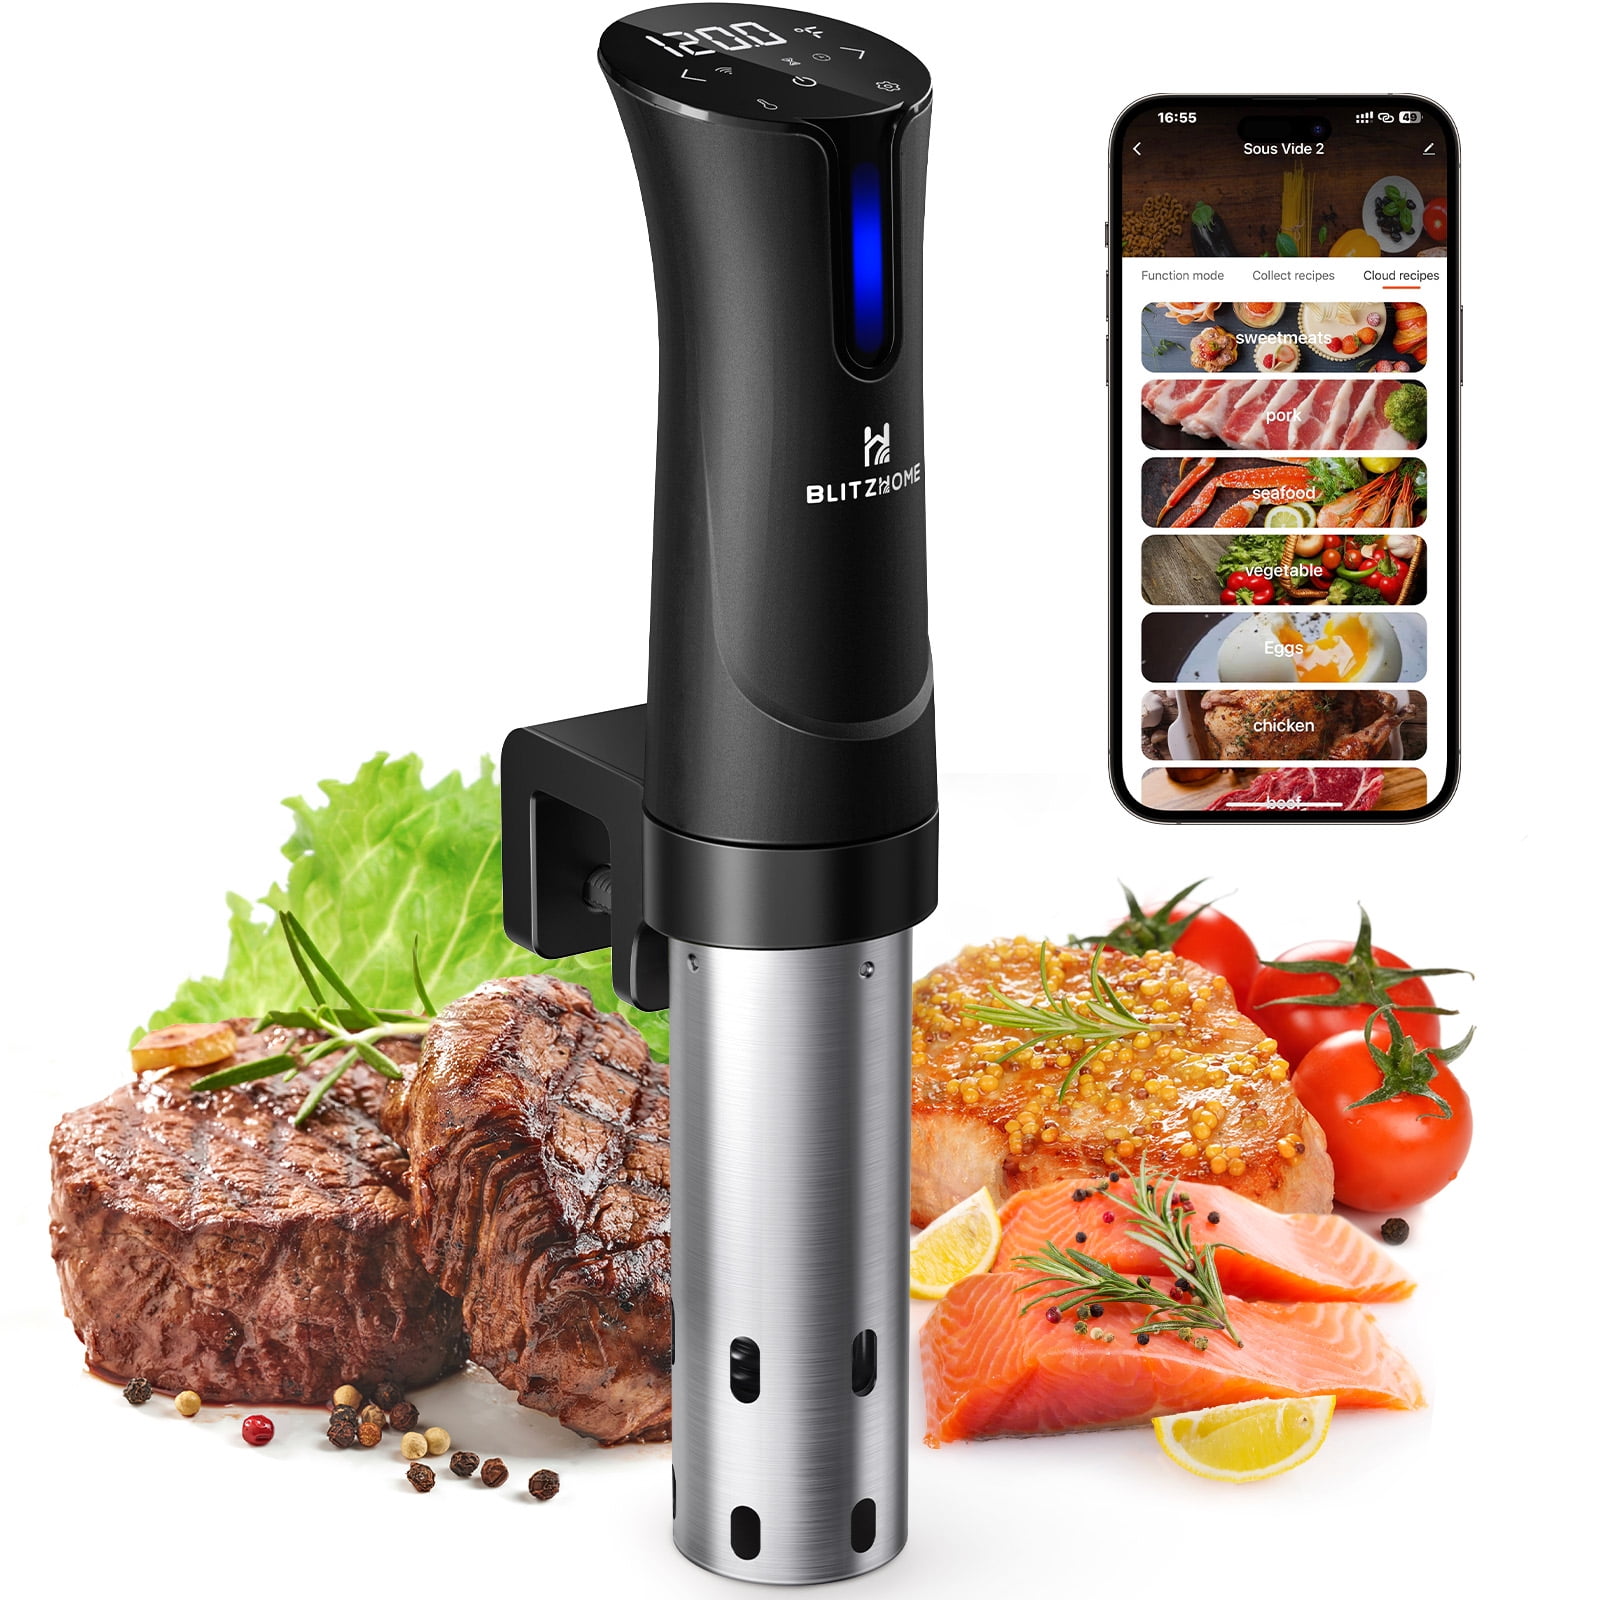 Sous Vides, Gourmia GMC650 11 in 1 Sous Vide & Multi Cooker - Purple  Stainless Steel, LCD Display, Multiple Cooking Options, Bonus Accessories &  Free Recipe Book